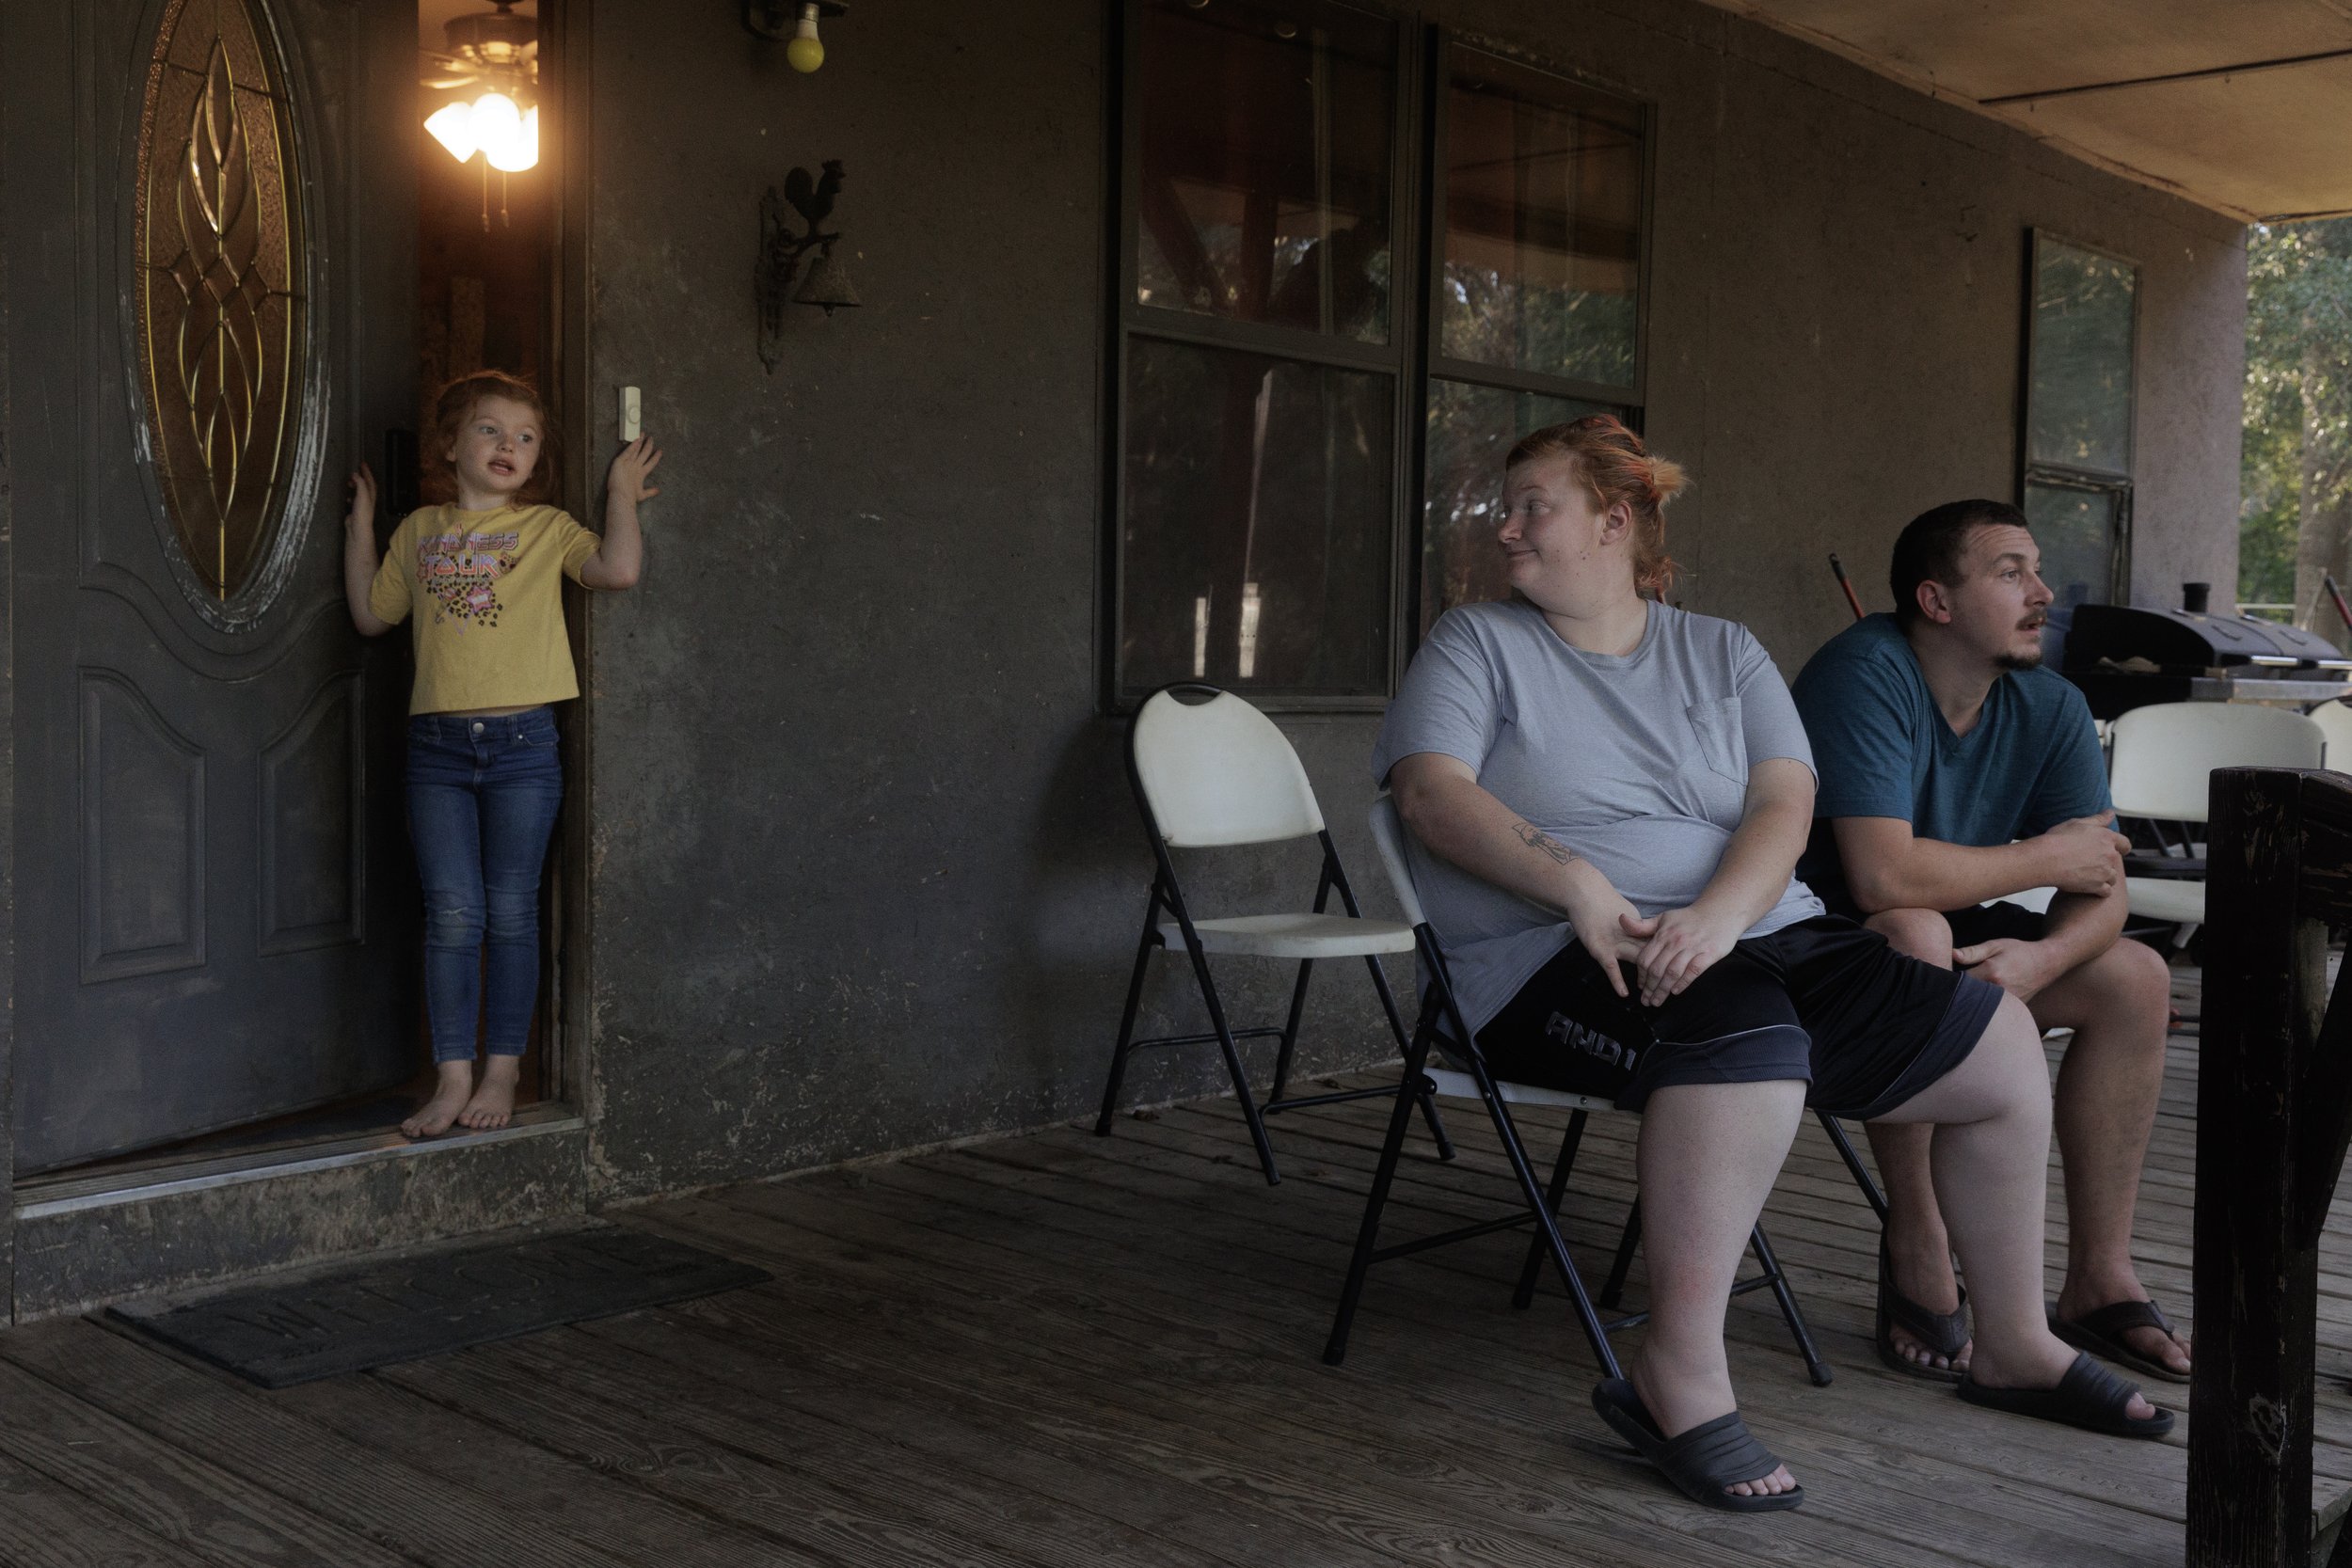  Artemis, 4, asks her mother Miranda to come inside and play with her. “How am I supposed to answer their questions when I don’t have my own answers?” Miranda has struggled to parent her children through a tragedy she herself hasn’t come to terms wit